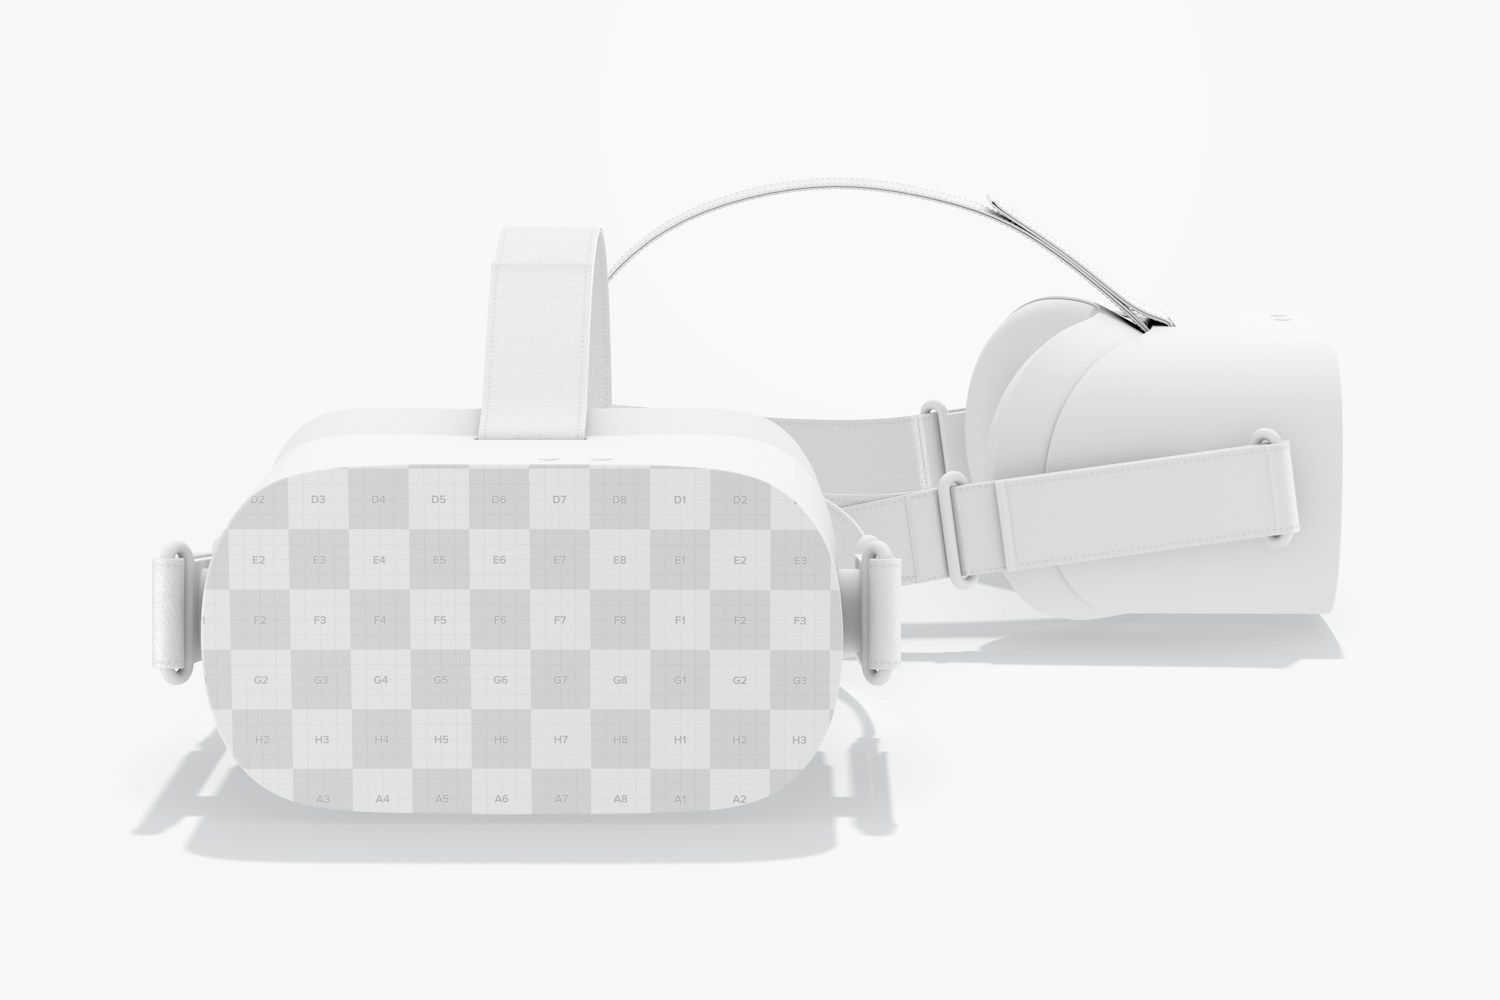 VR Glasses Mockup, Front and Side View